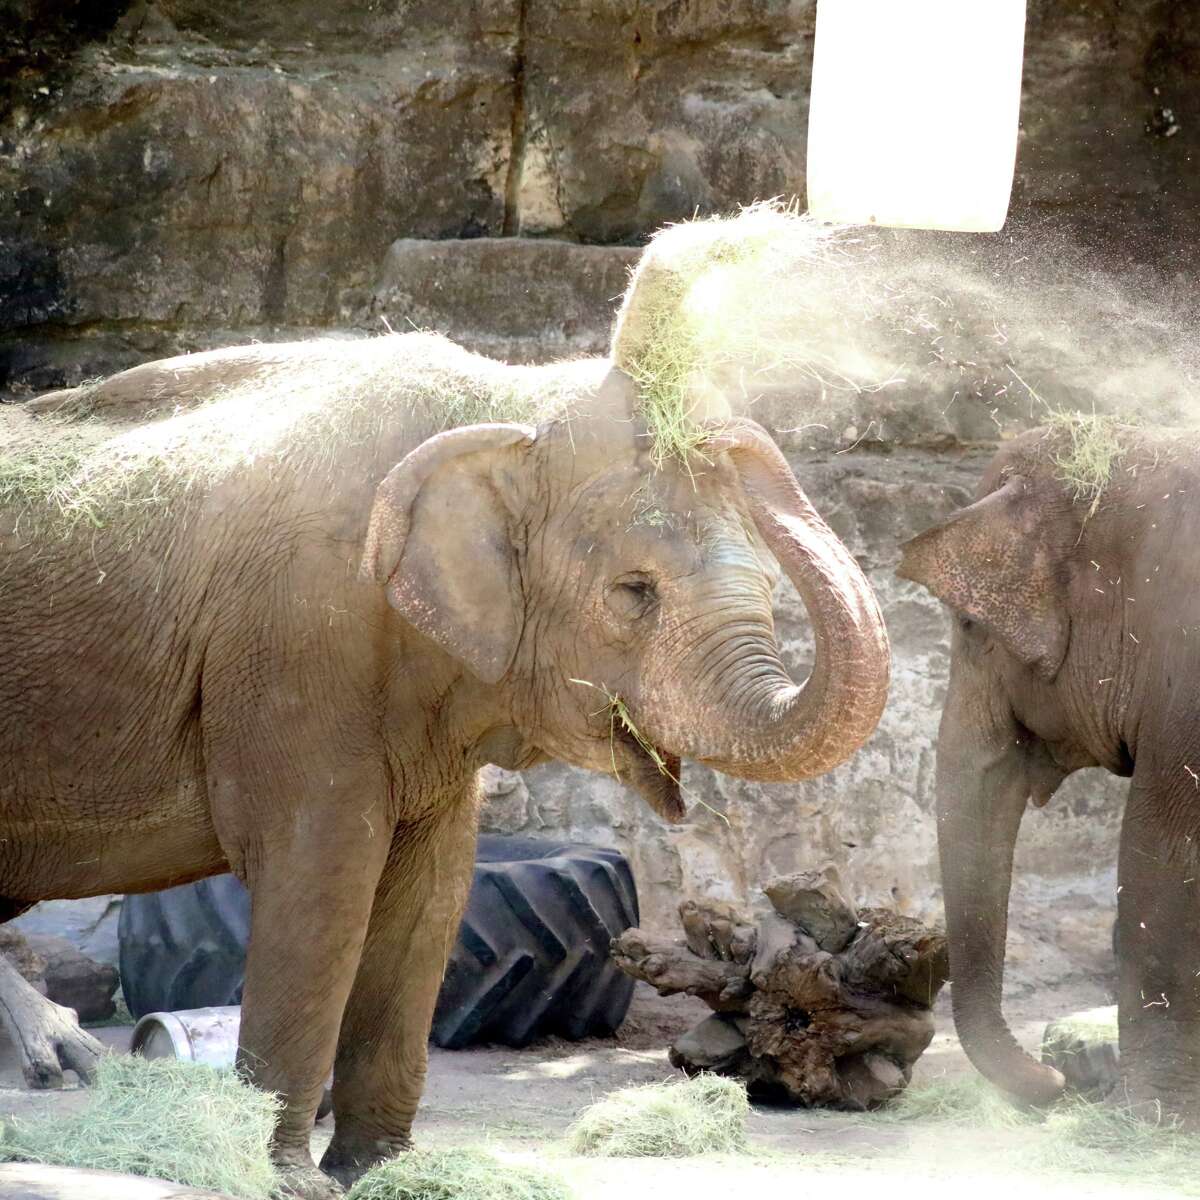 San Antonio Zoo is mourning the passing of one of its beloved elephants that died Wednesday afternoon. 